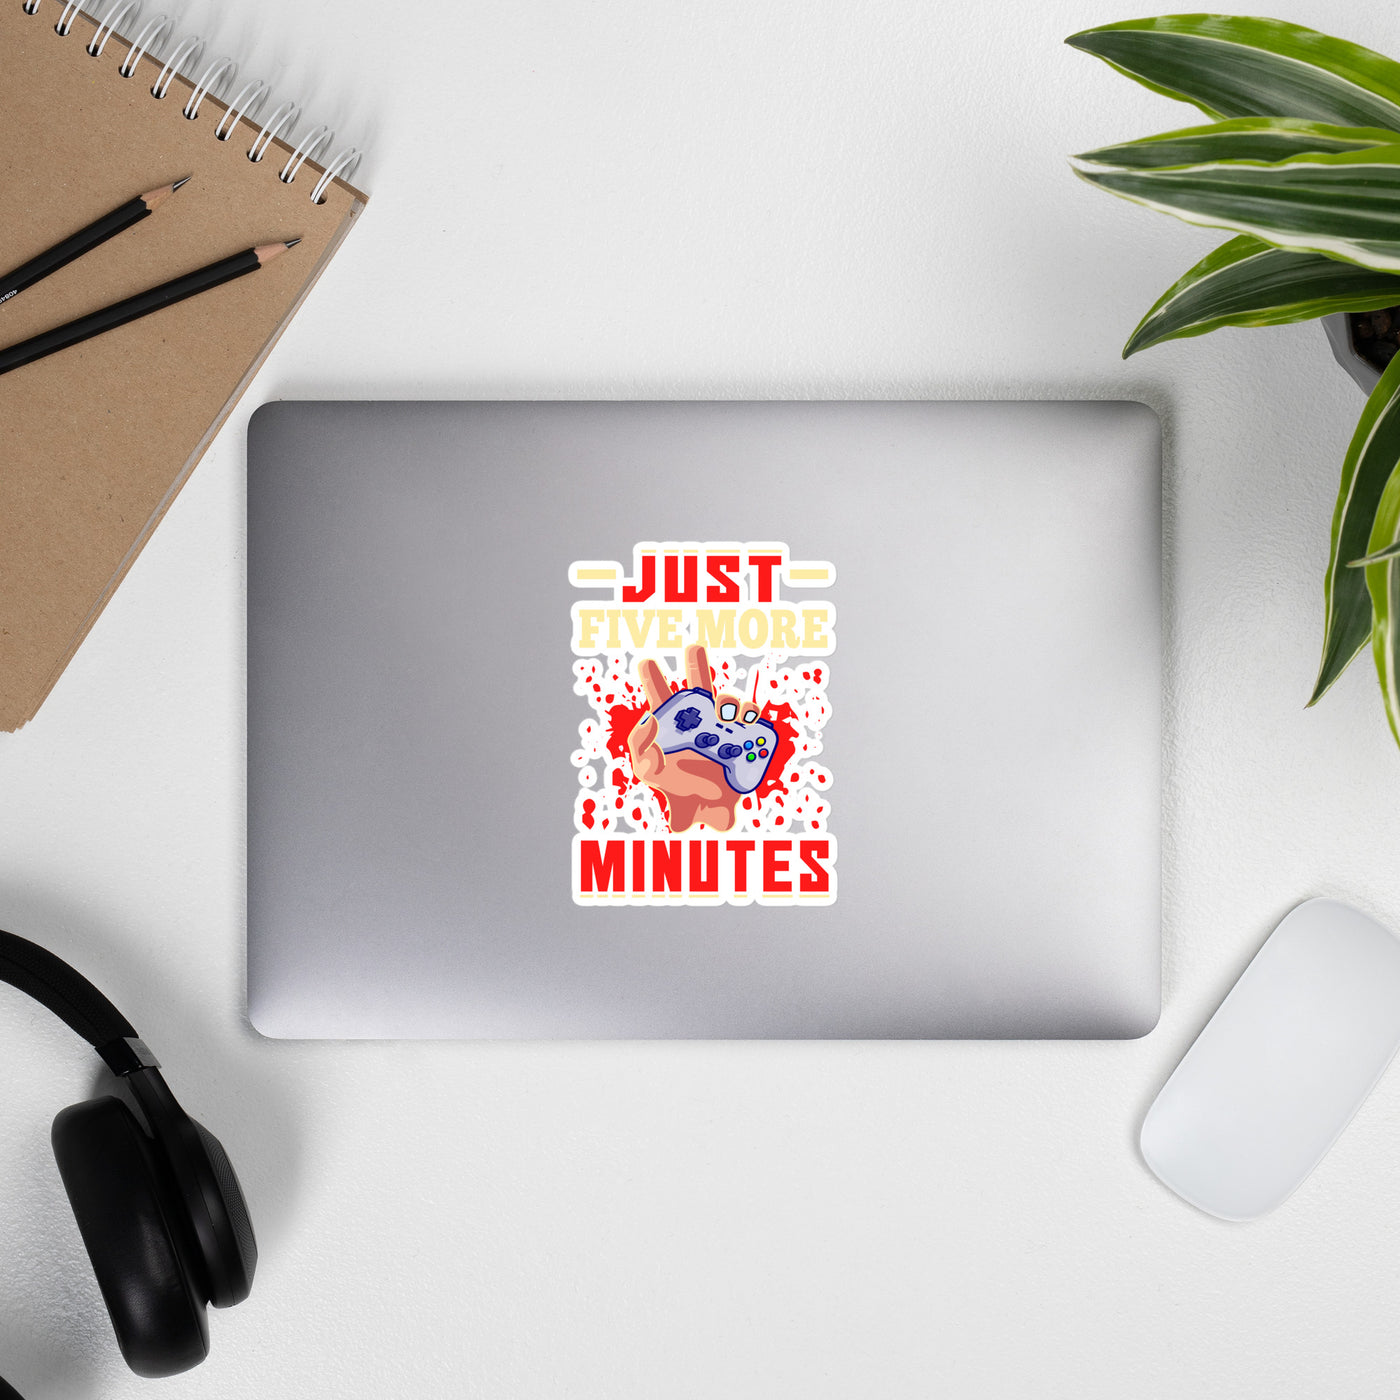 Just 5 more Minutes Rima - Bubble-free stickers